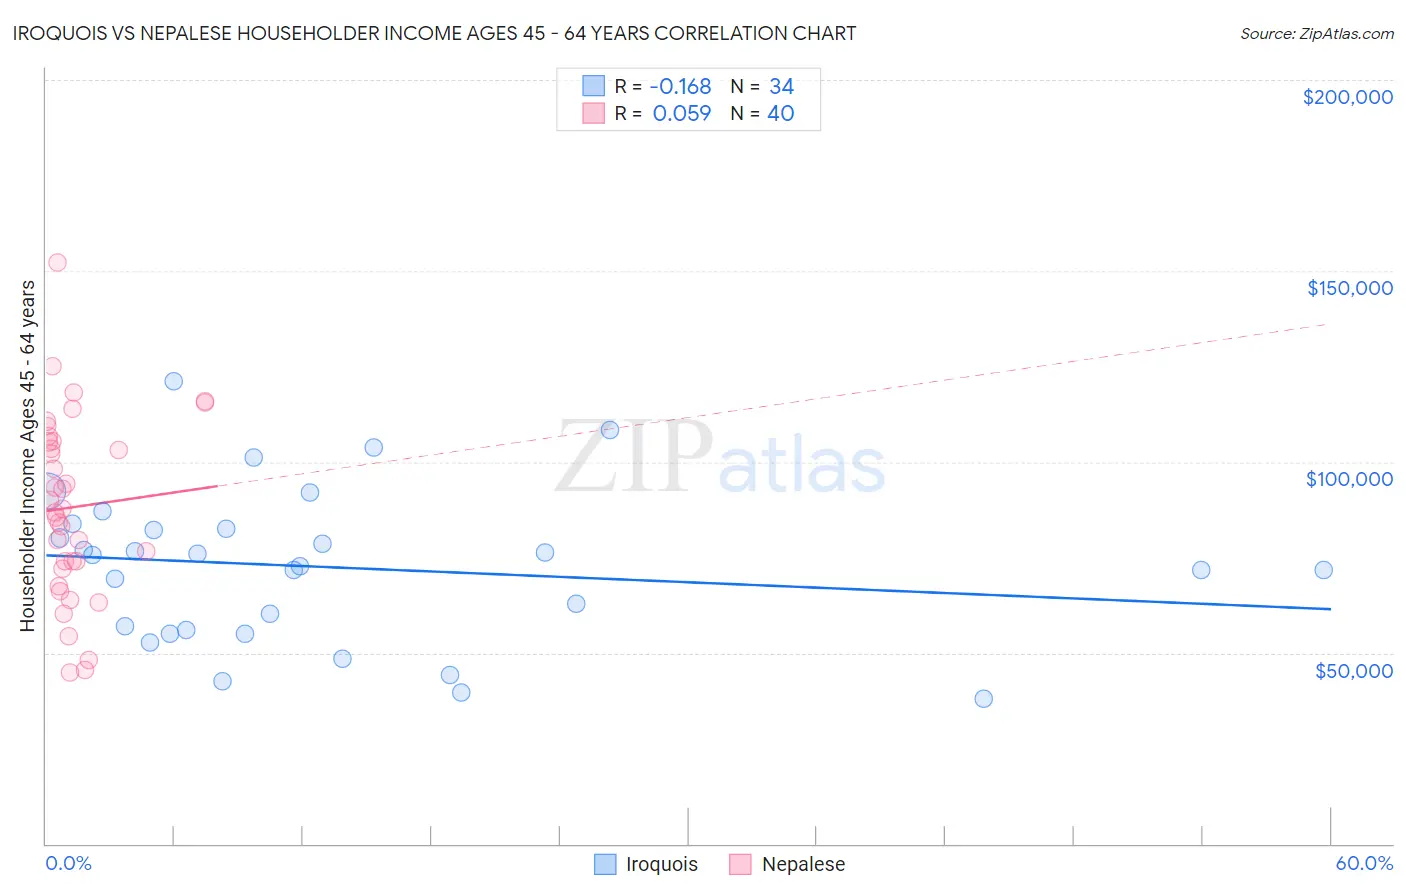 Iroquois vs Nepalese Householder Income Ages 45 - 64 years